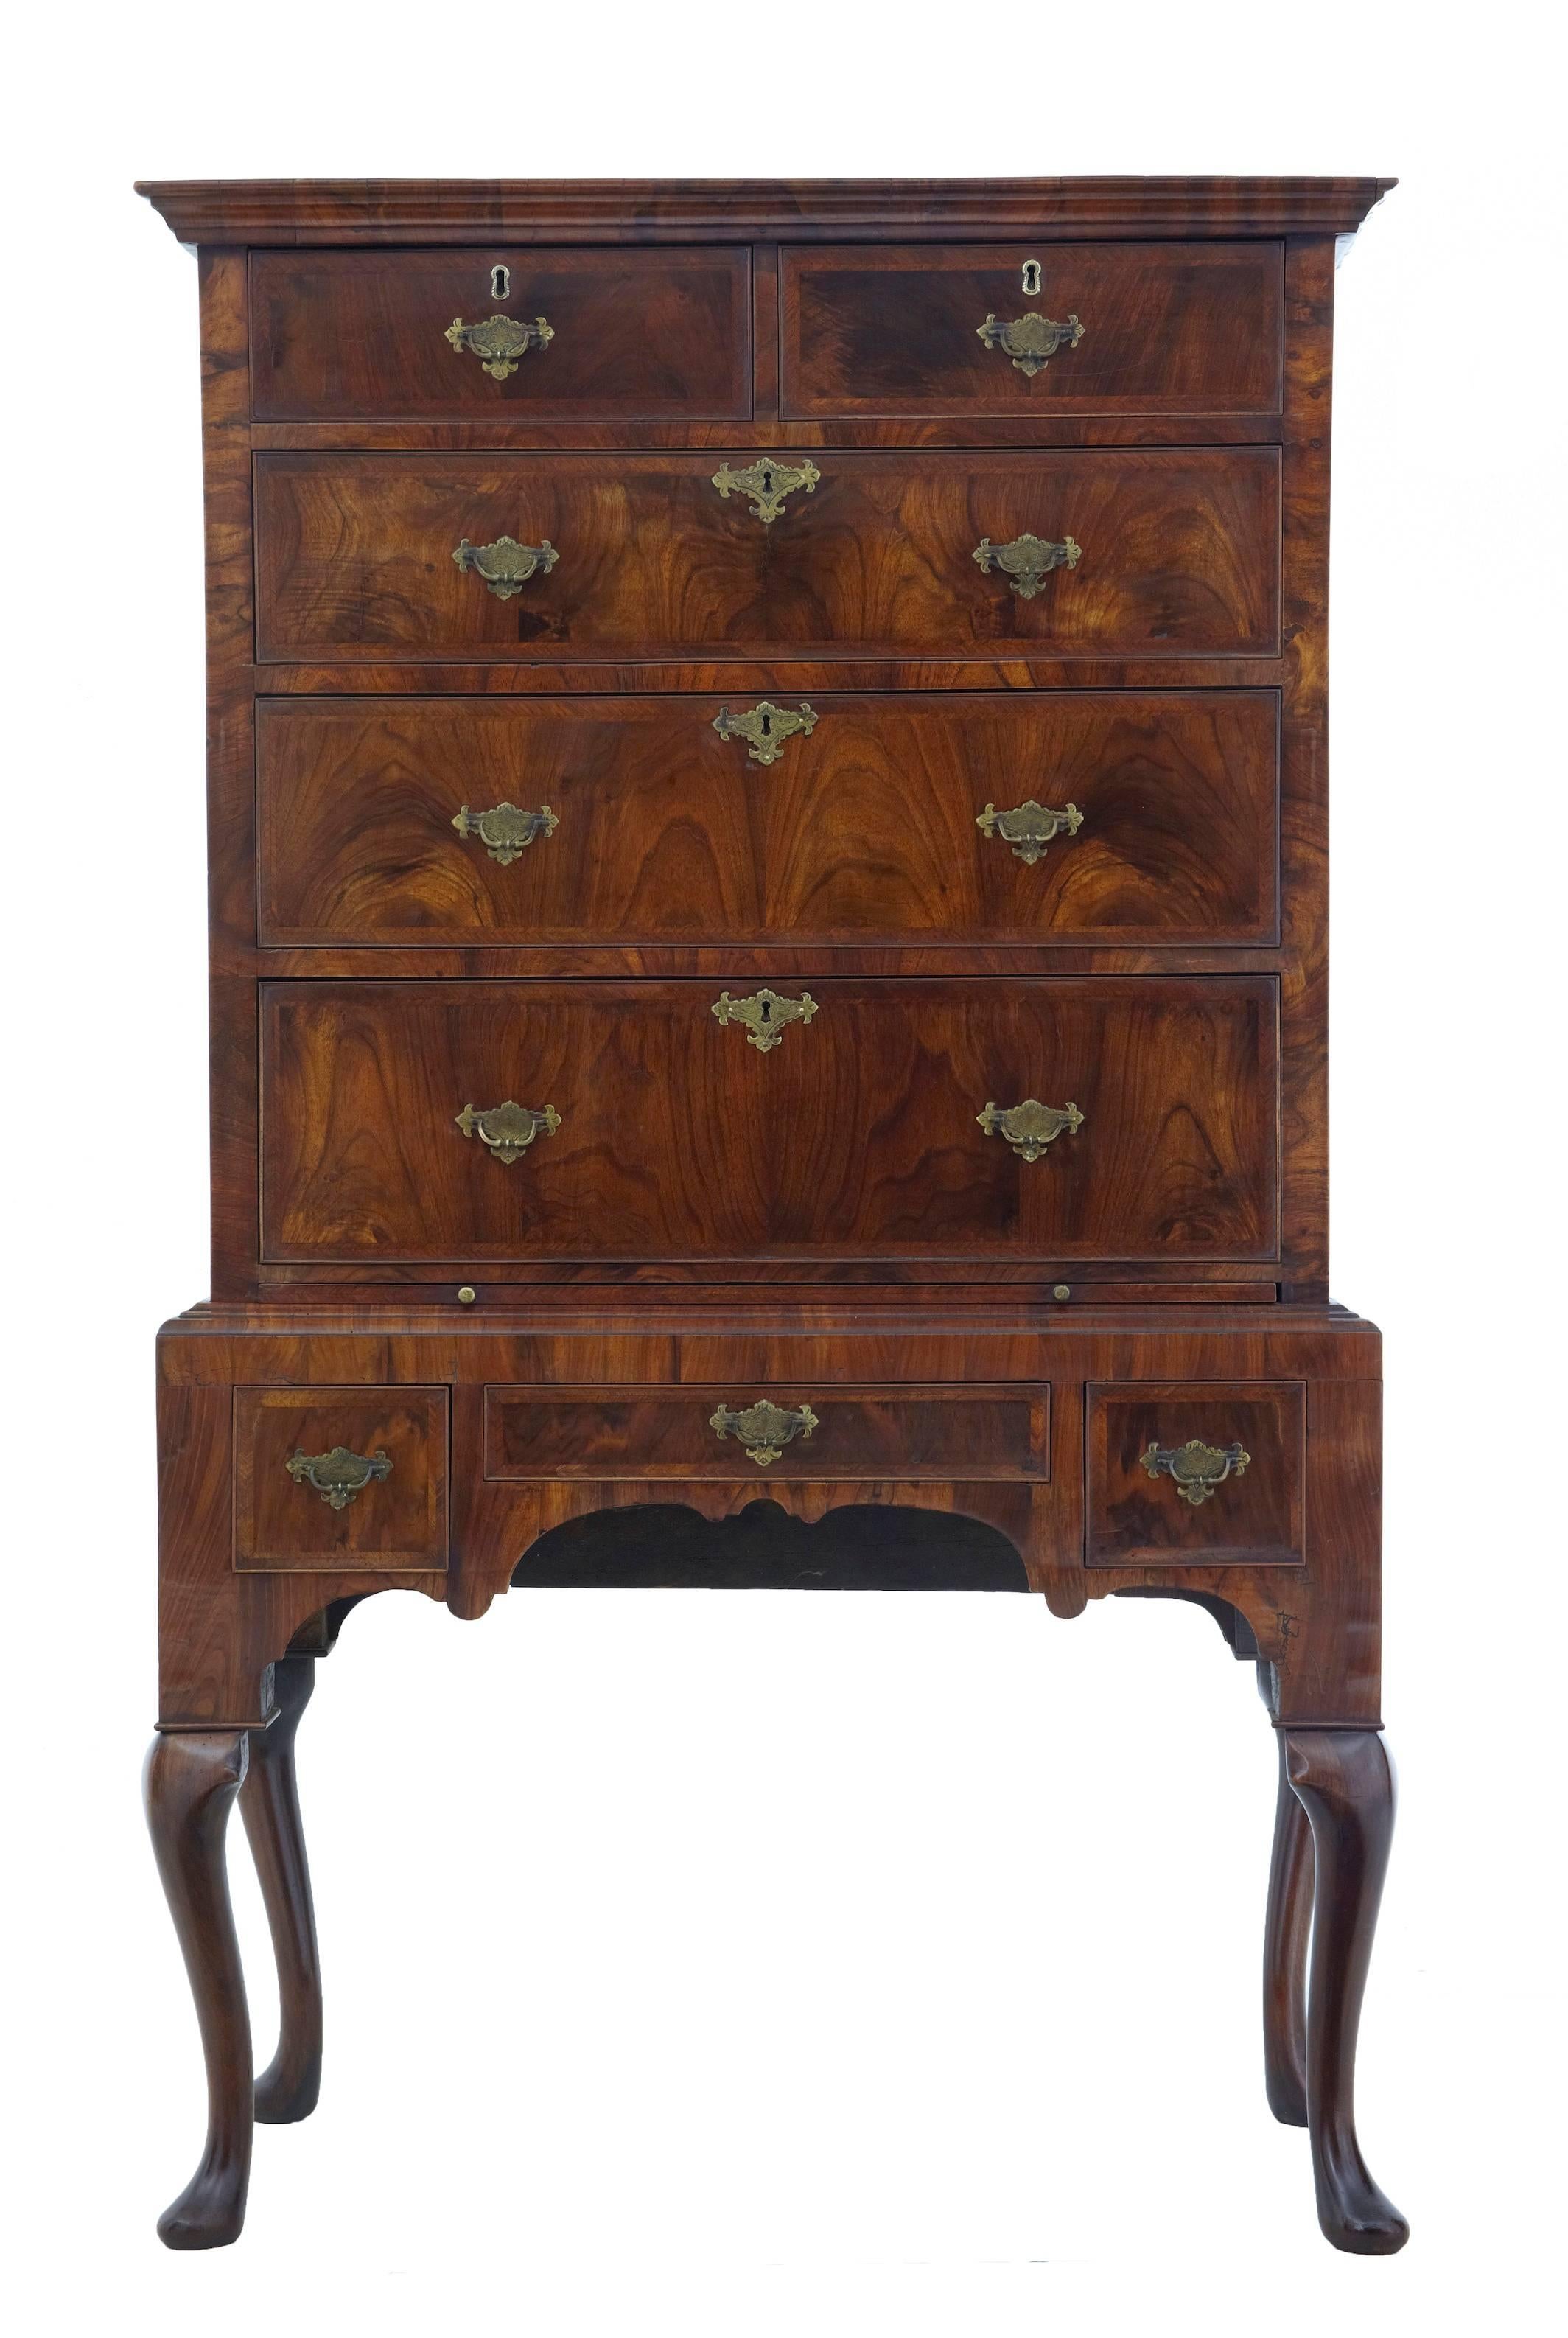 Good quality chest on stand in the Queen Anne taste, circa 1880.
Comprising of two parts.
Two over three drawers in the top section with brushing slide and three drawers in the base.
Crossbanded drawer fronts.
Standing on cabriole legs and pad